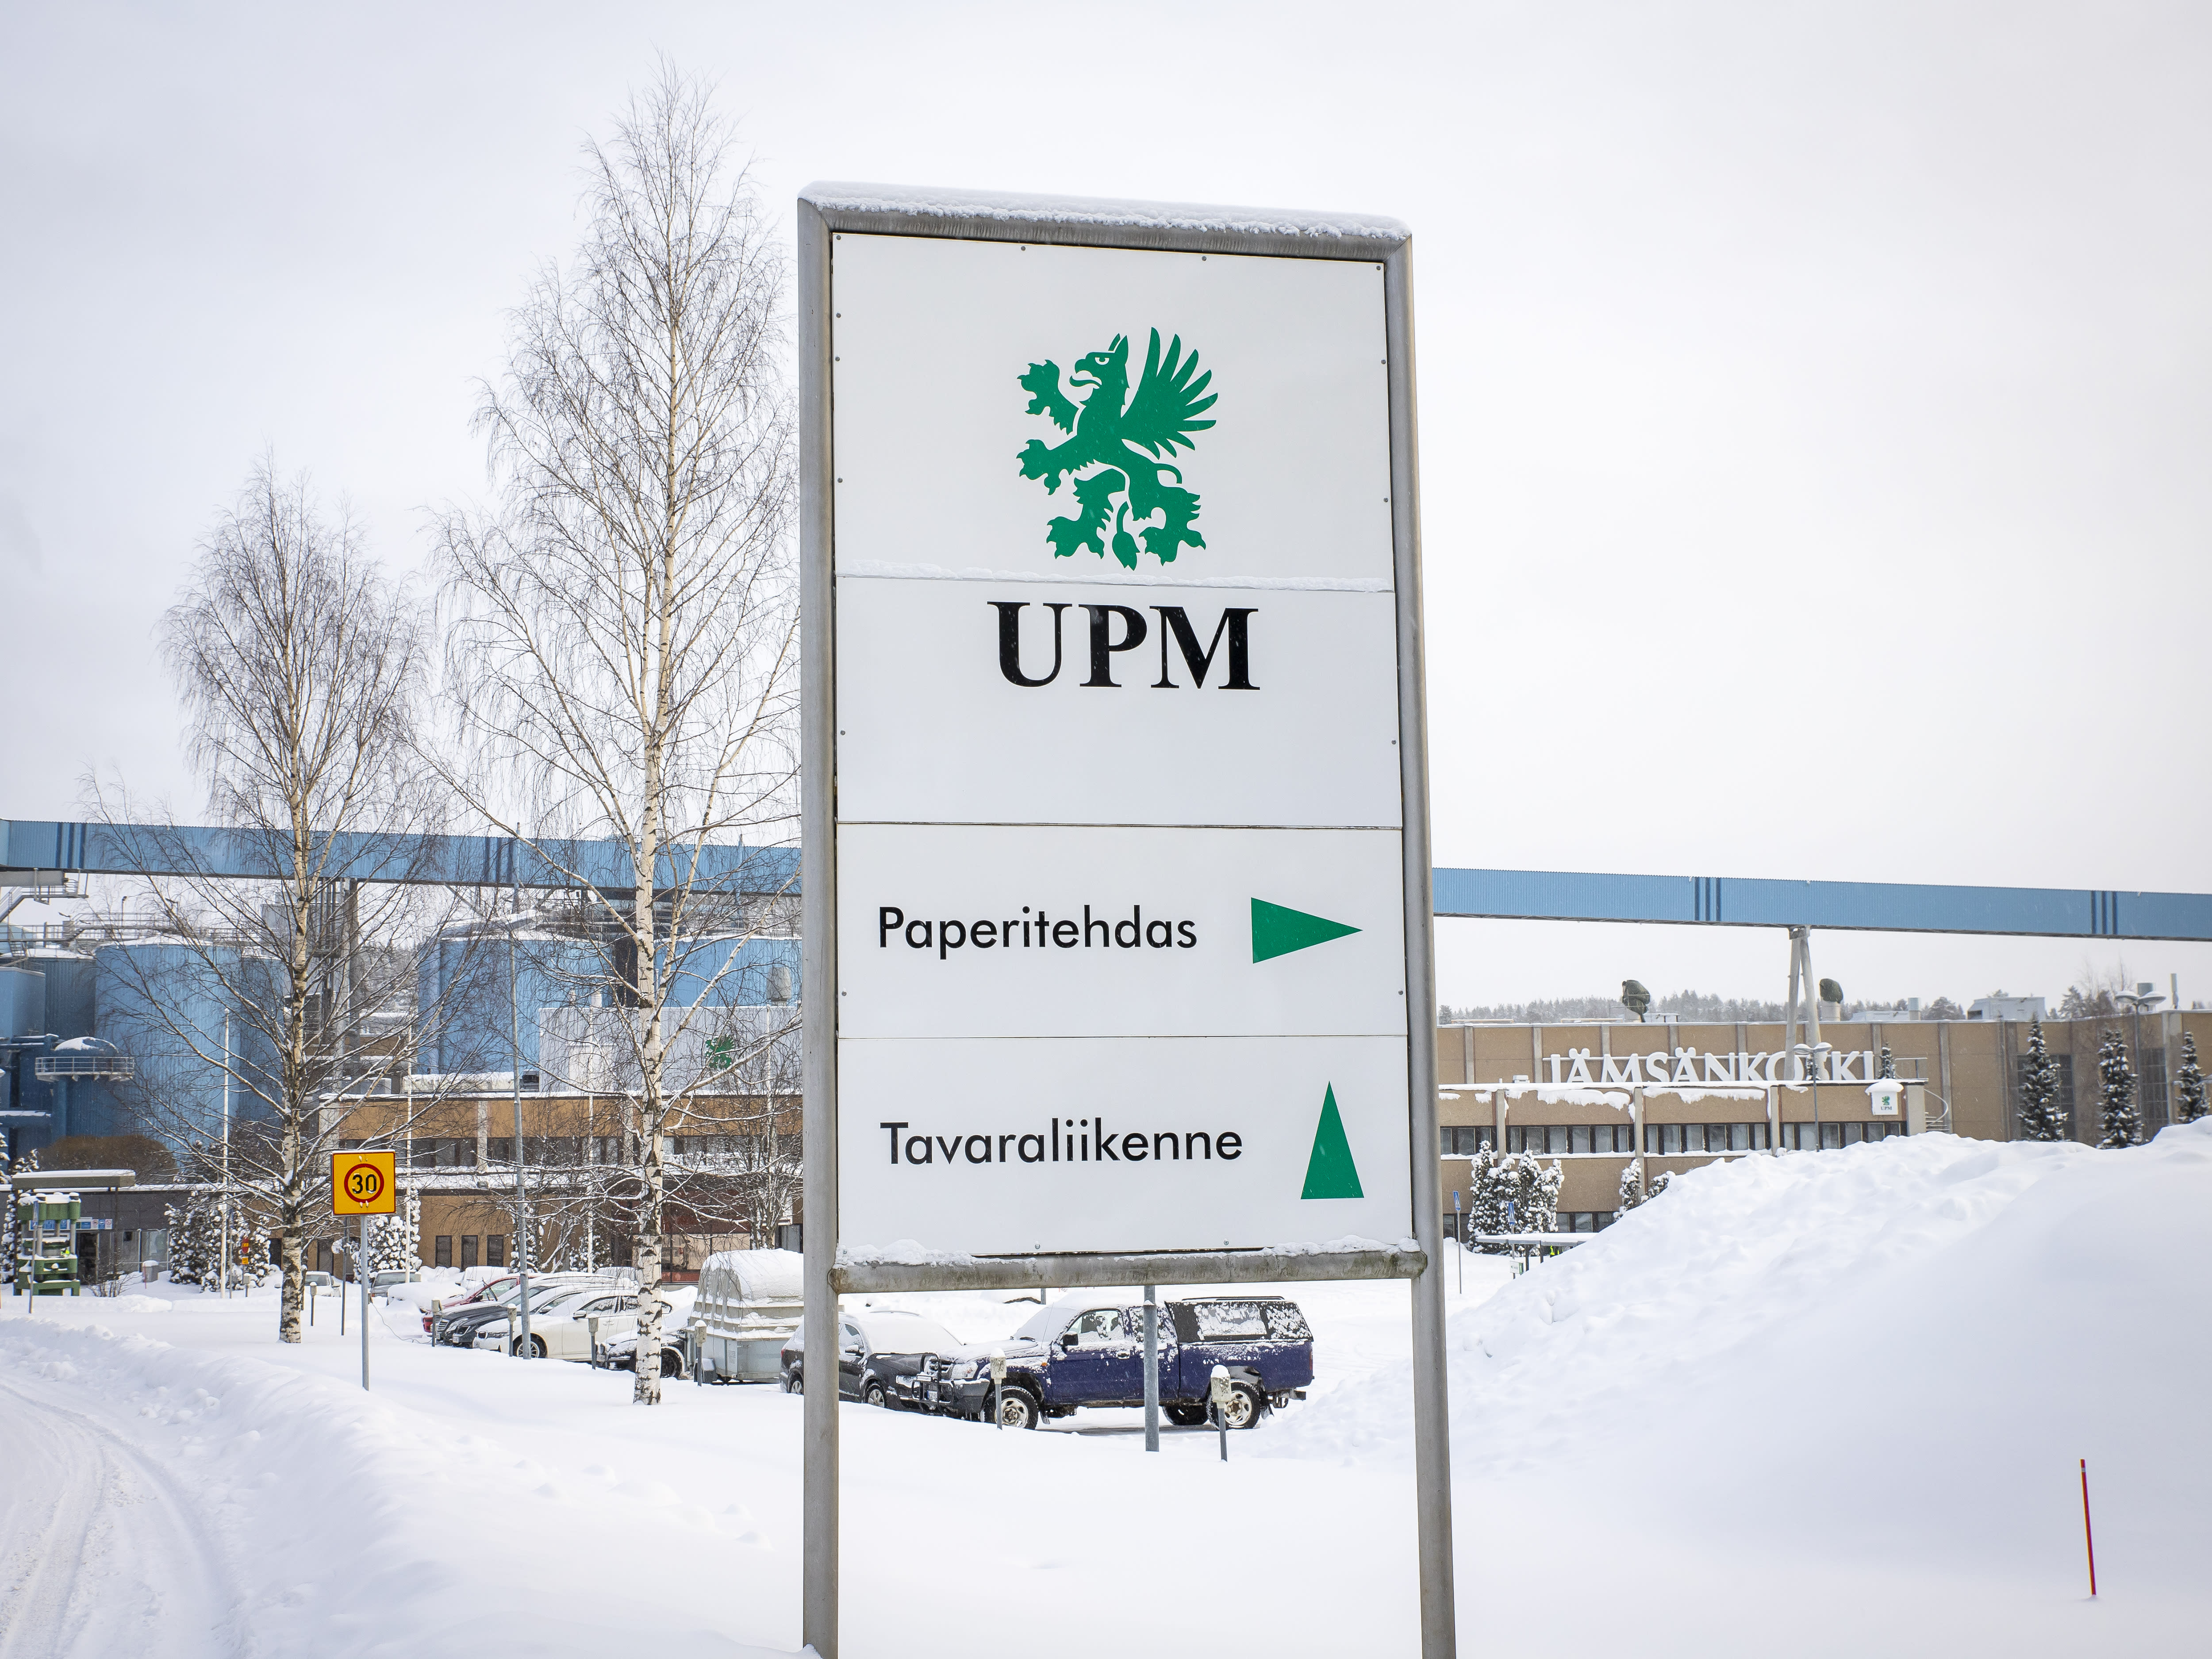 The Paper Association will continue to strike UPM until the end of April